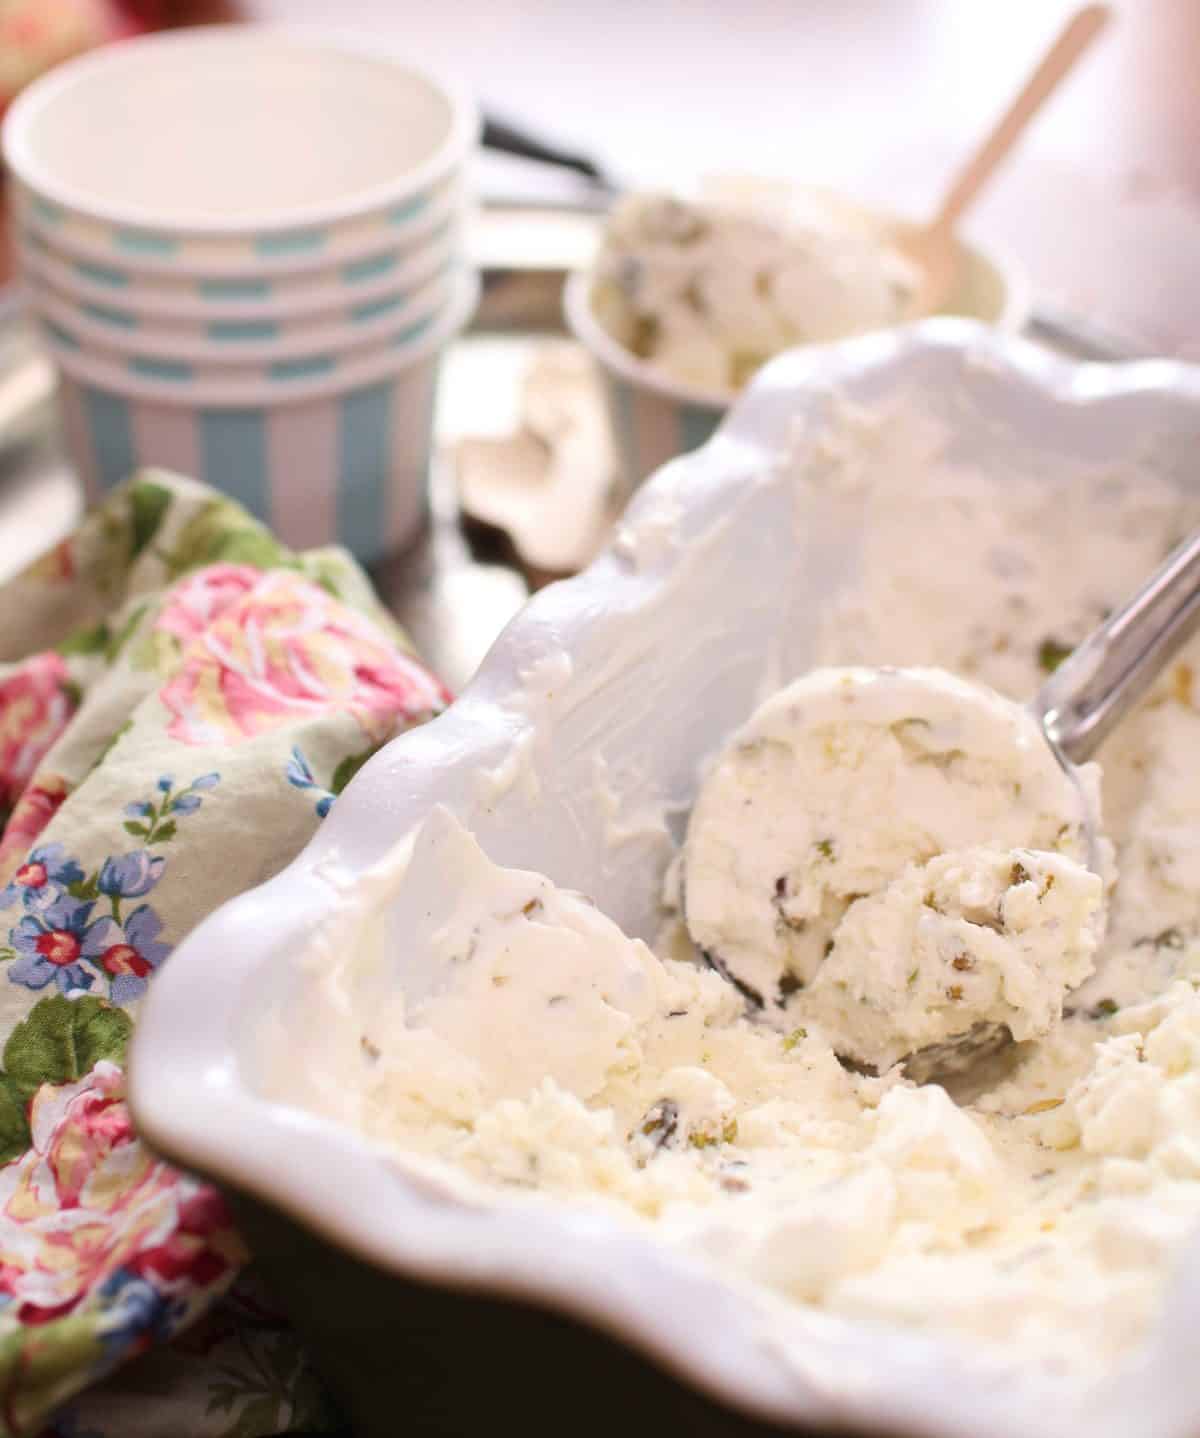 a bowl of pistachio ice cream with a scoop in the center.